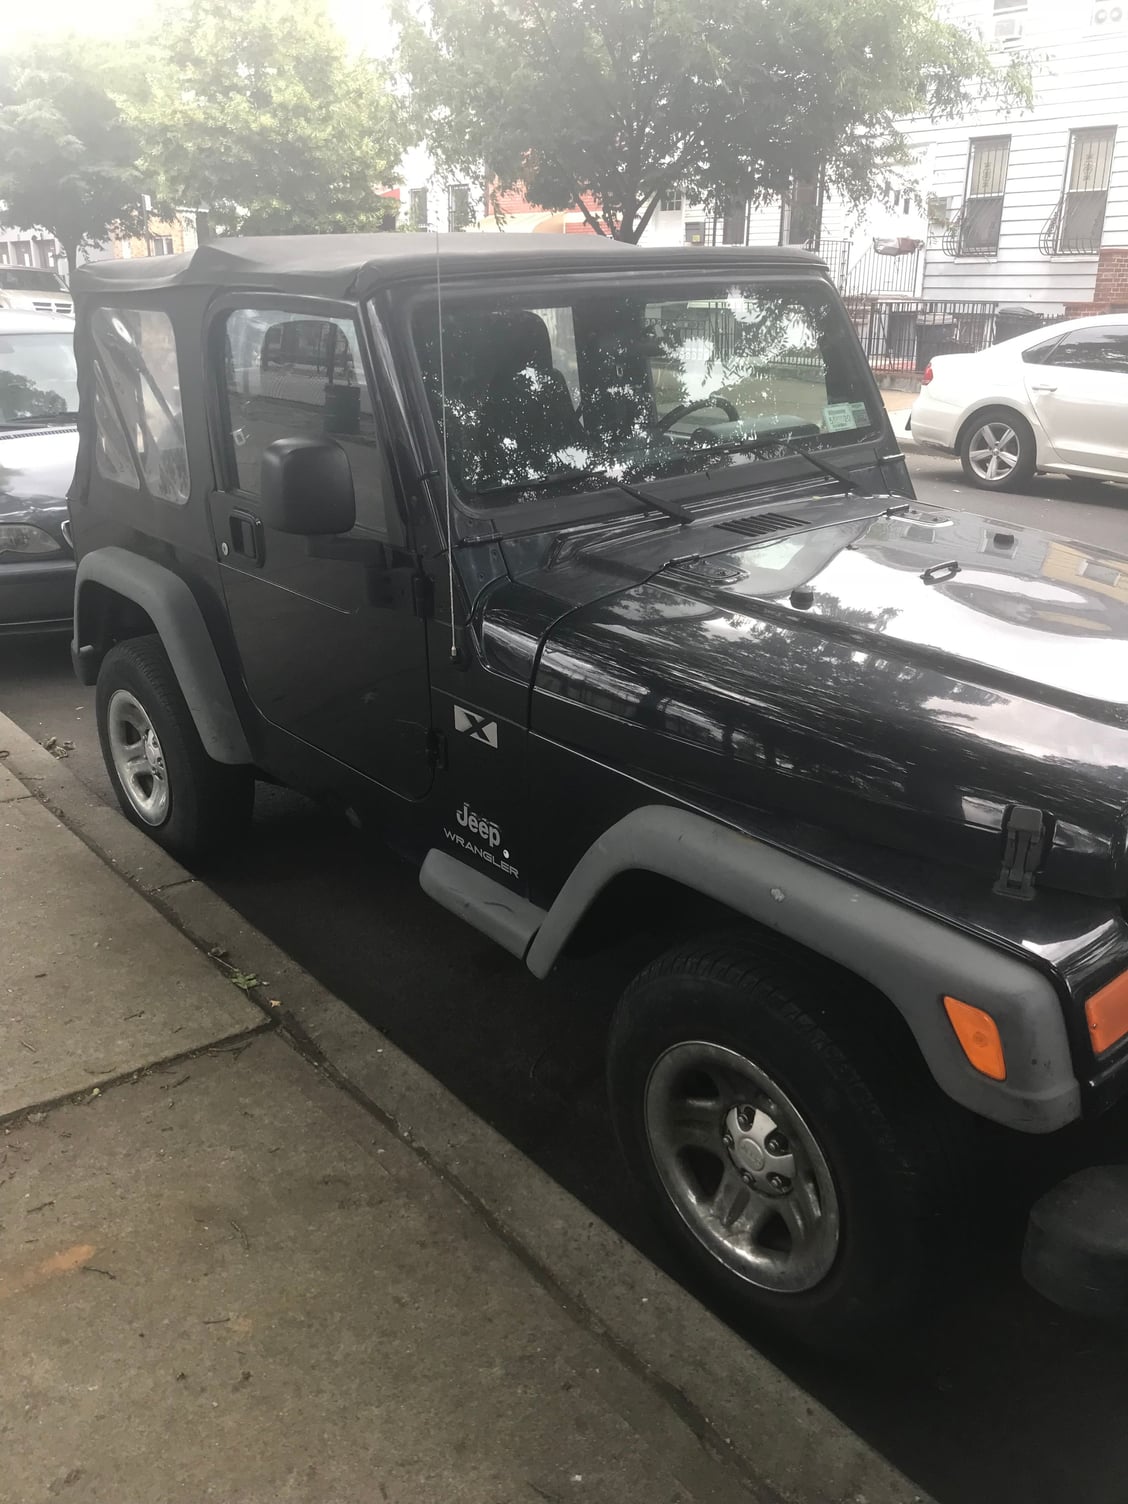 2005 Jeep Wrangler - 2005 Jeep Wrangler X for Sale - NYC area - Used - VIN 1J4FA39S65P349492 - 112,000 Miles - 6 cyl - 4WD - Automatic - SUV - Black - Brooklyn, NY 11213, United States